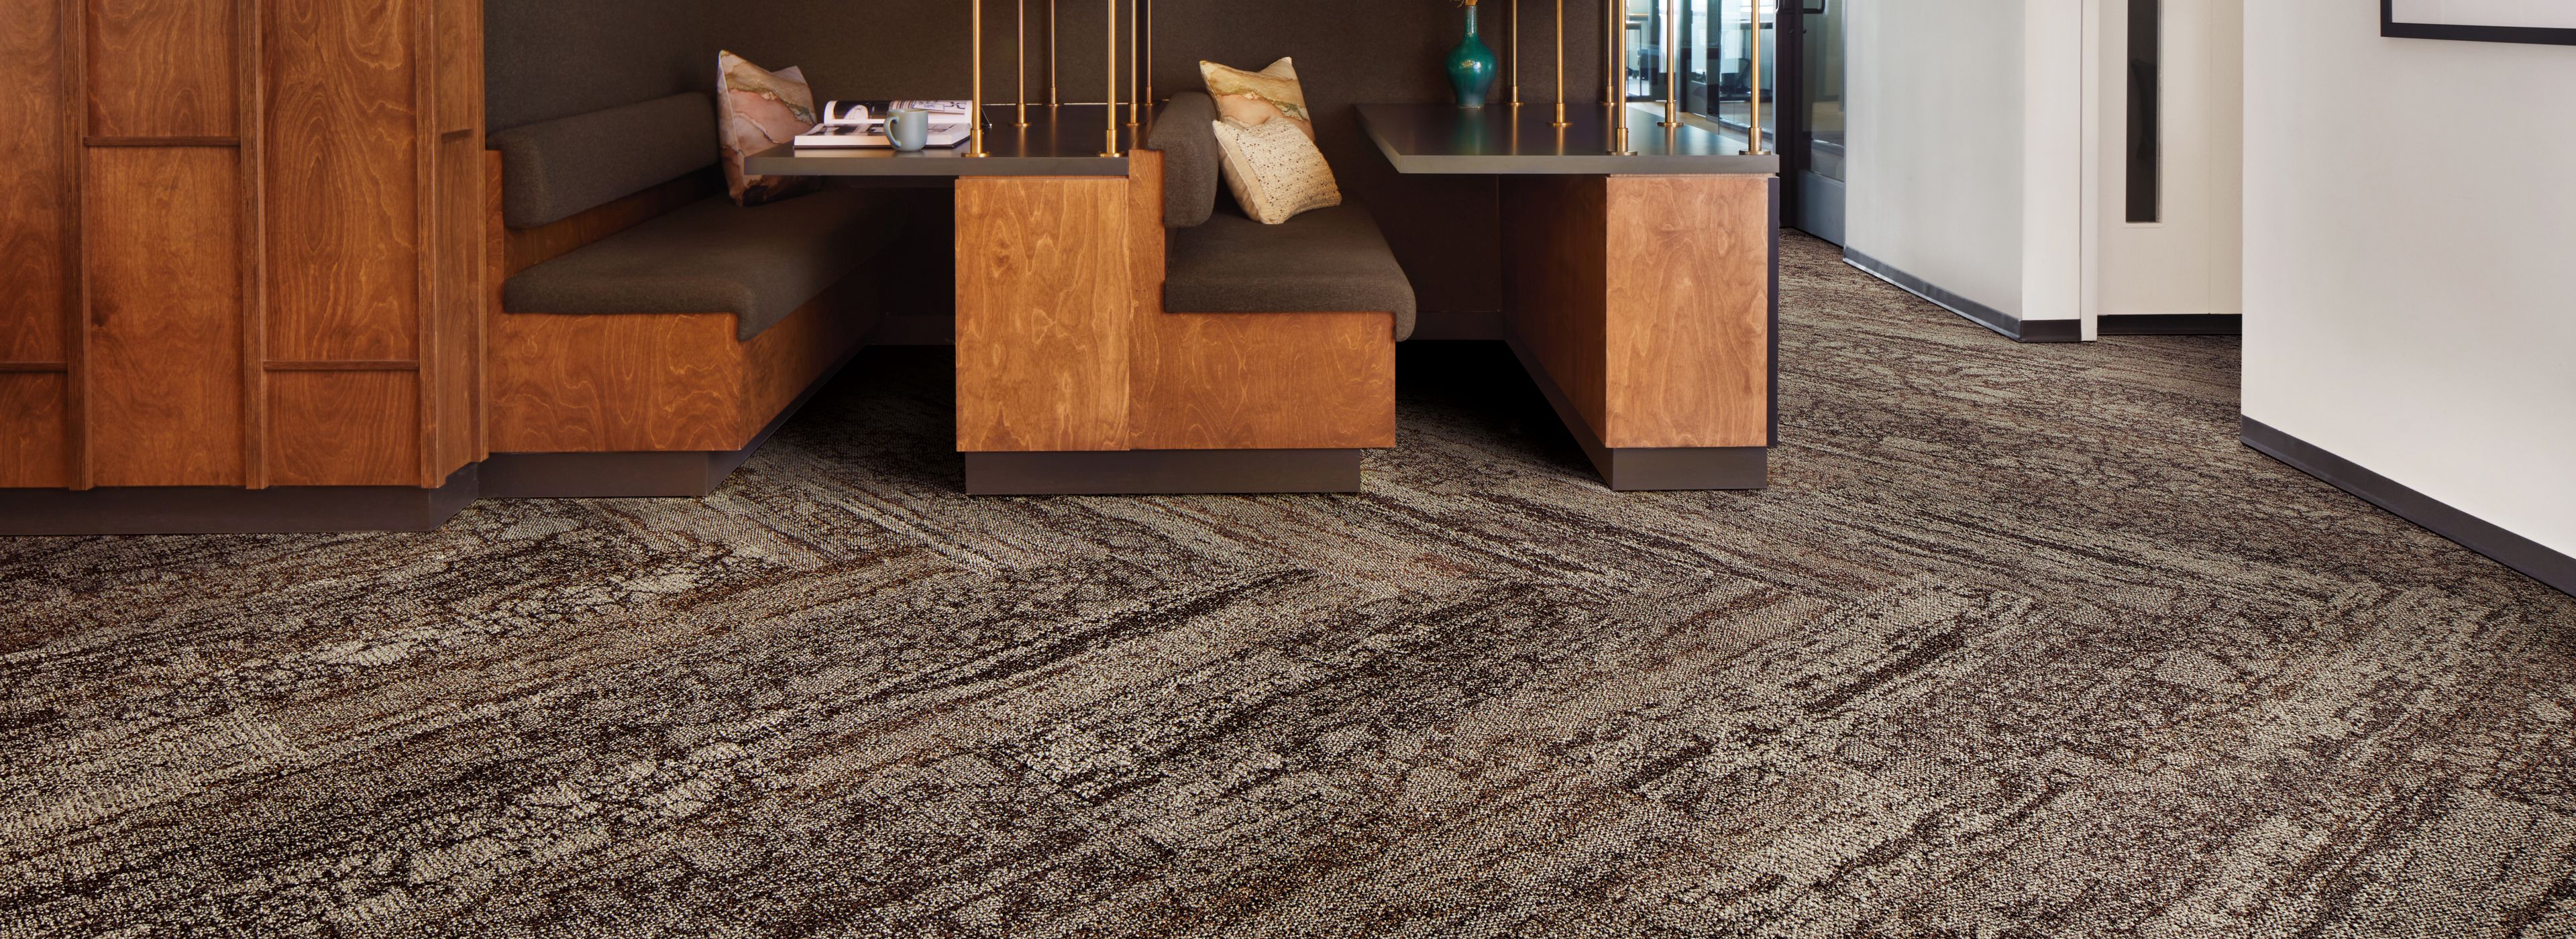 Interface Eben plank carpet tile in a flexible work space image number 1